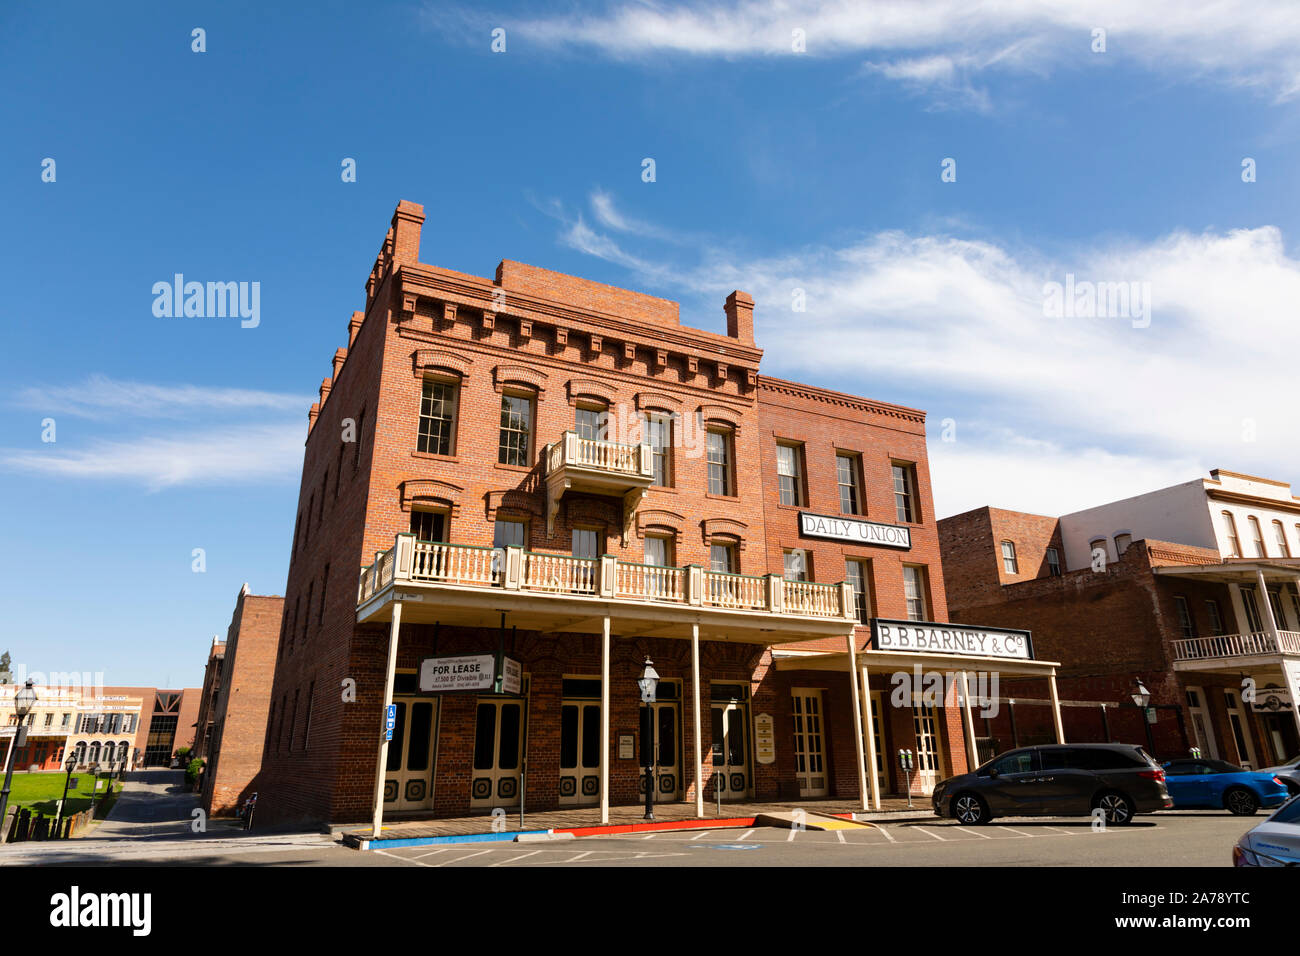 Daily Union, B.B. Barney & Co building, Old Town, Sacramento, State capital of California, United States of America. Stock Photo